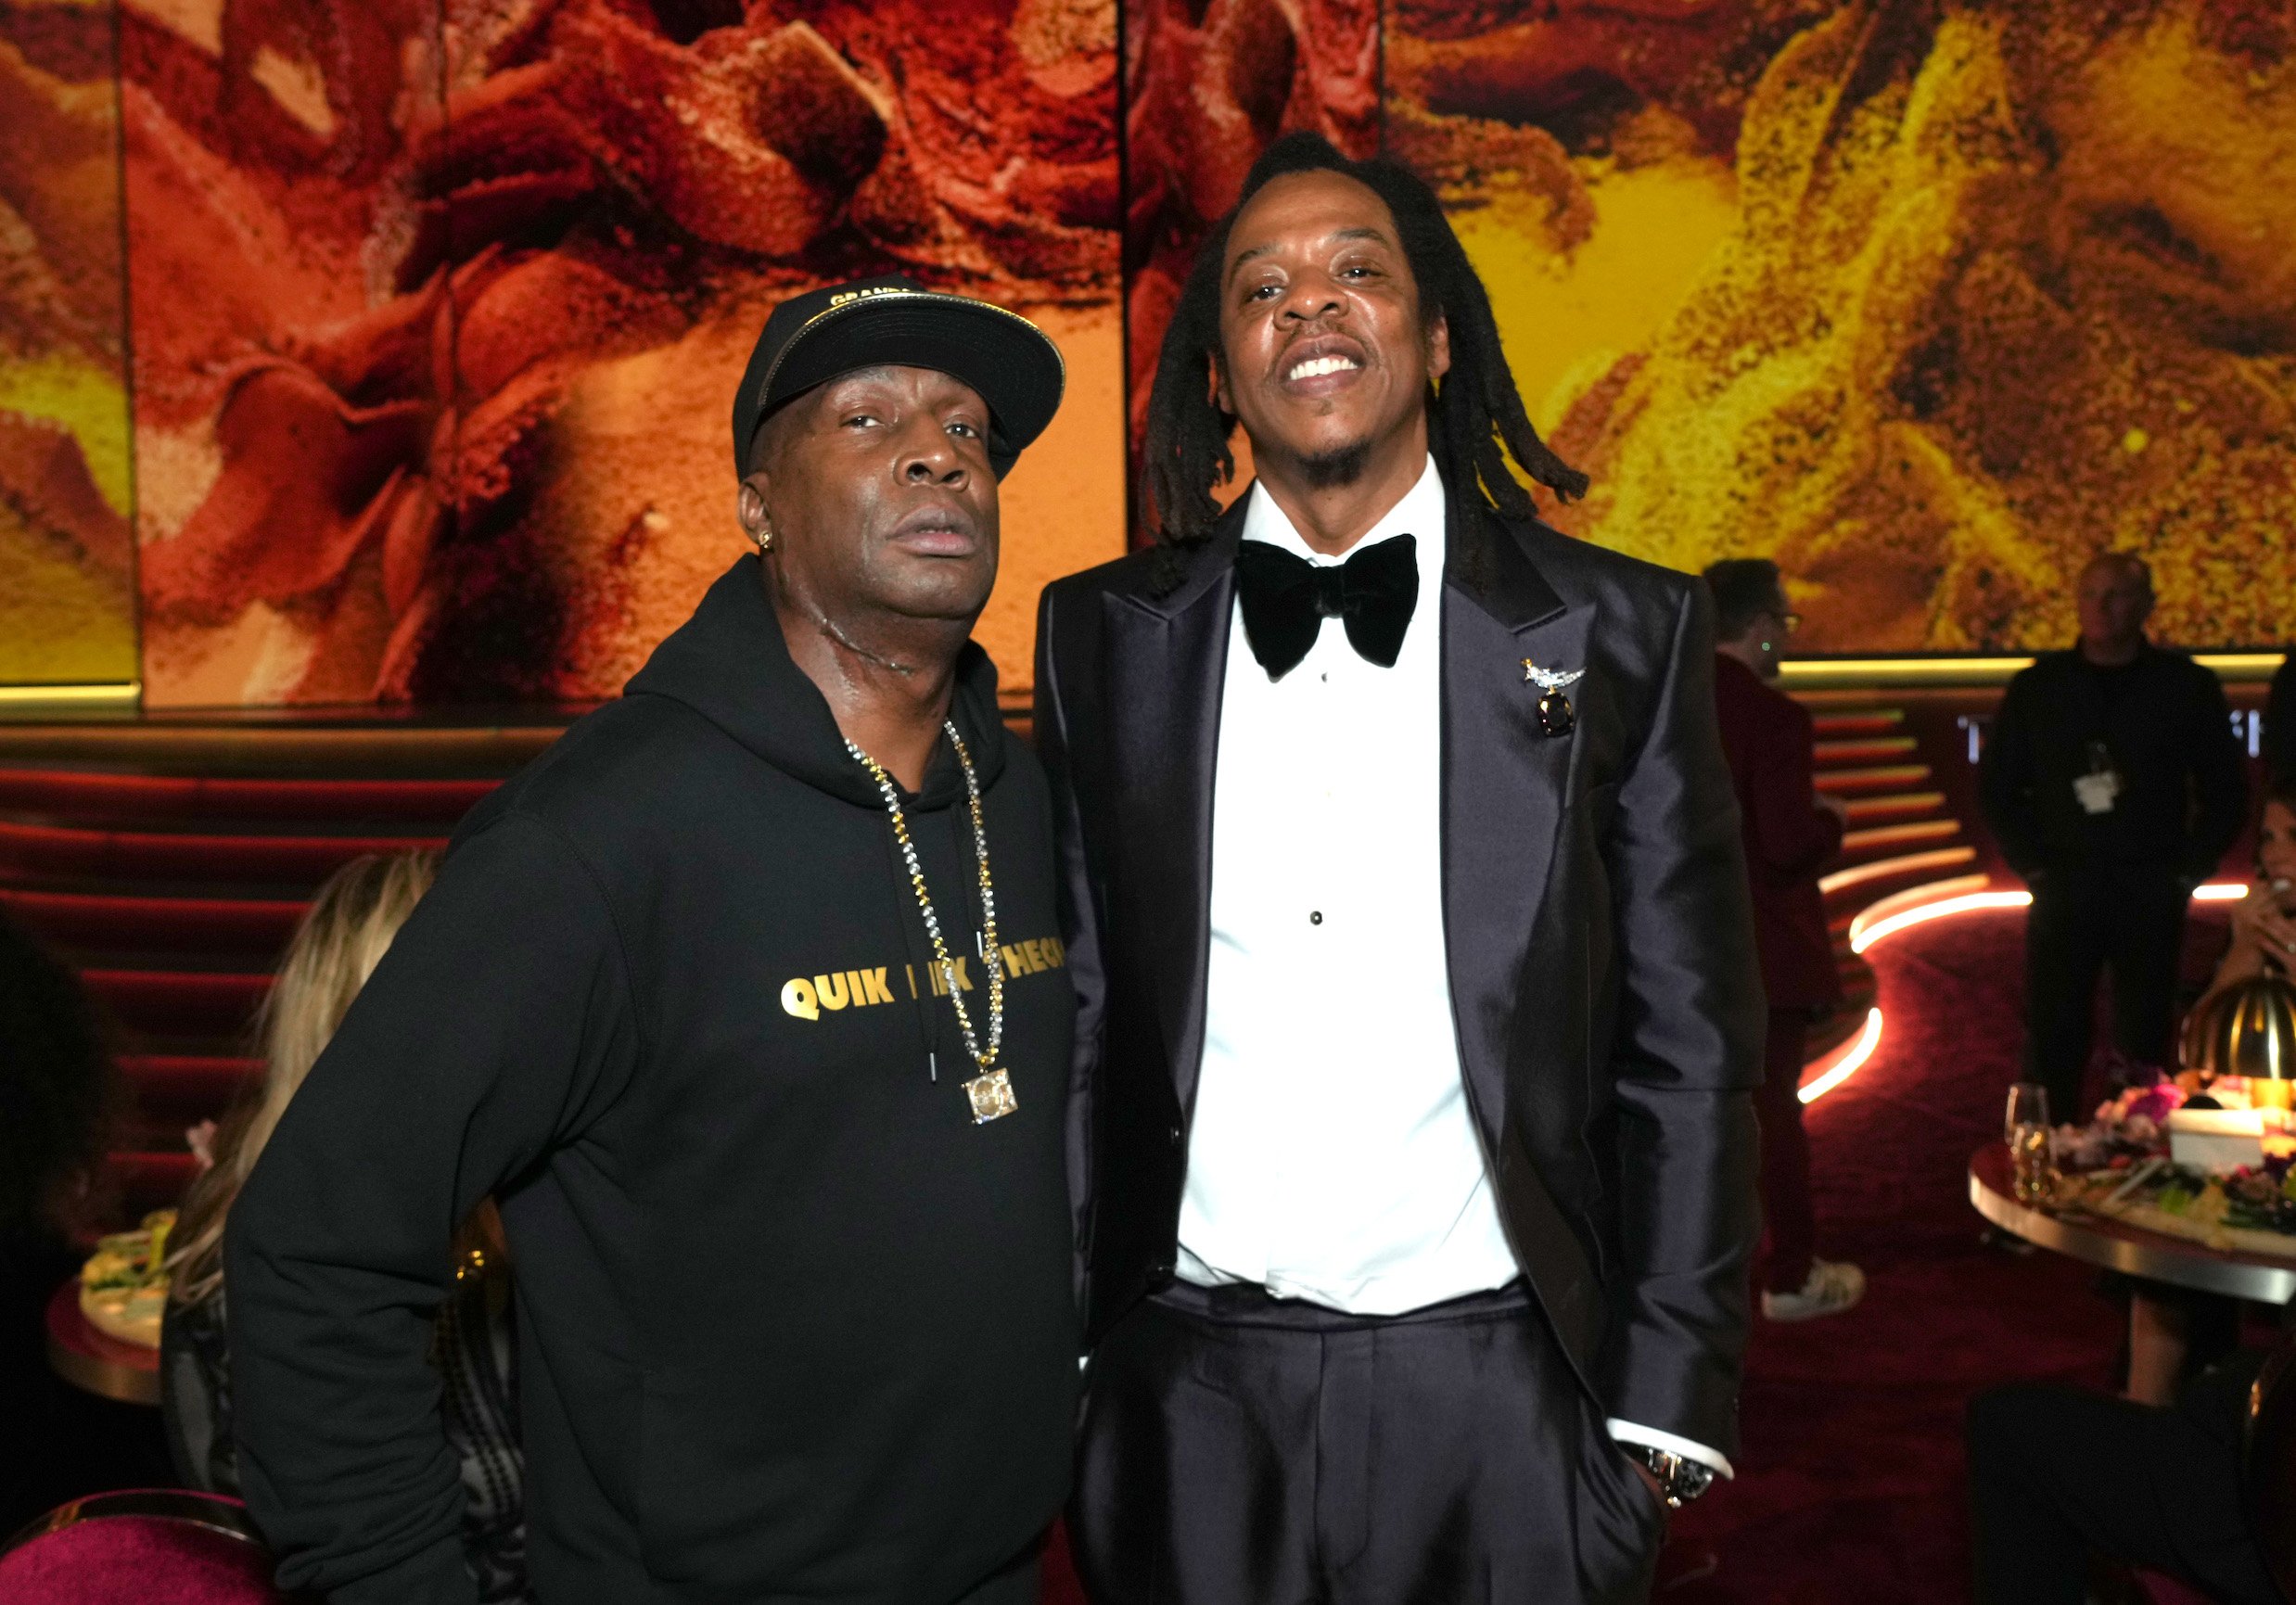 Grandmaster Flash and Jay-Z attend the 65th Grammy Awards in Los Angeles, California